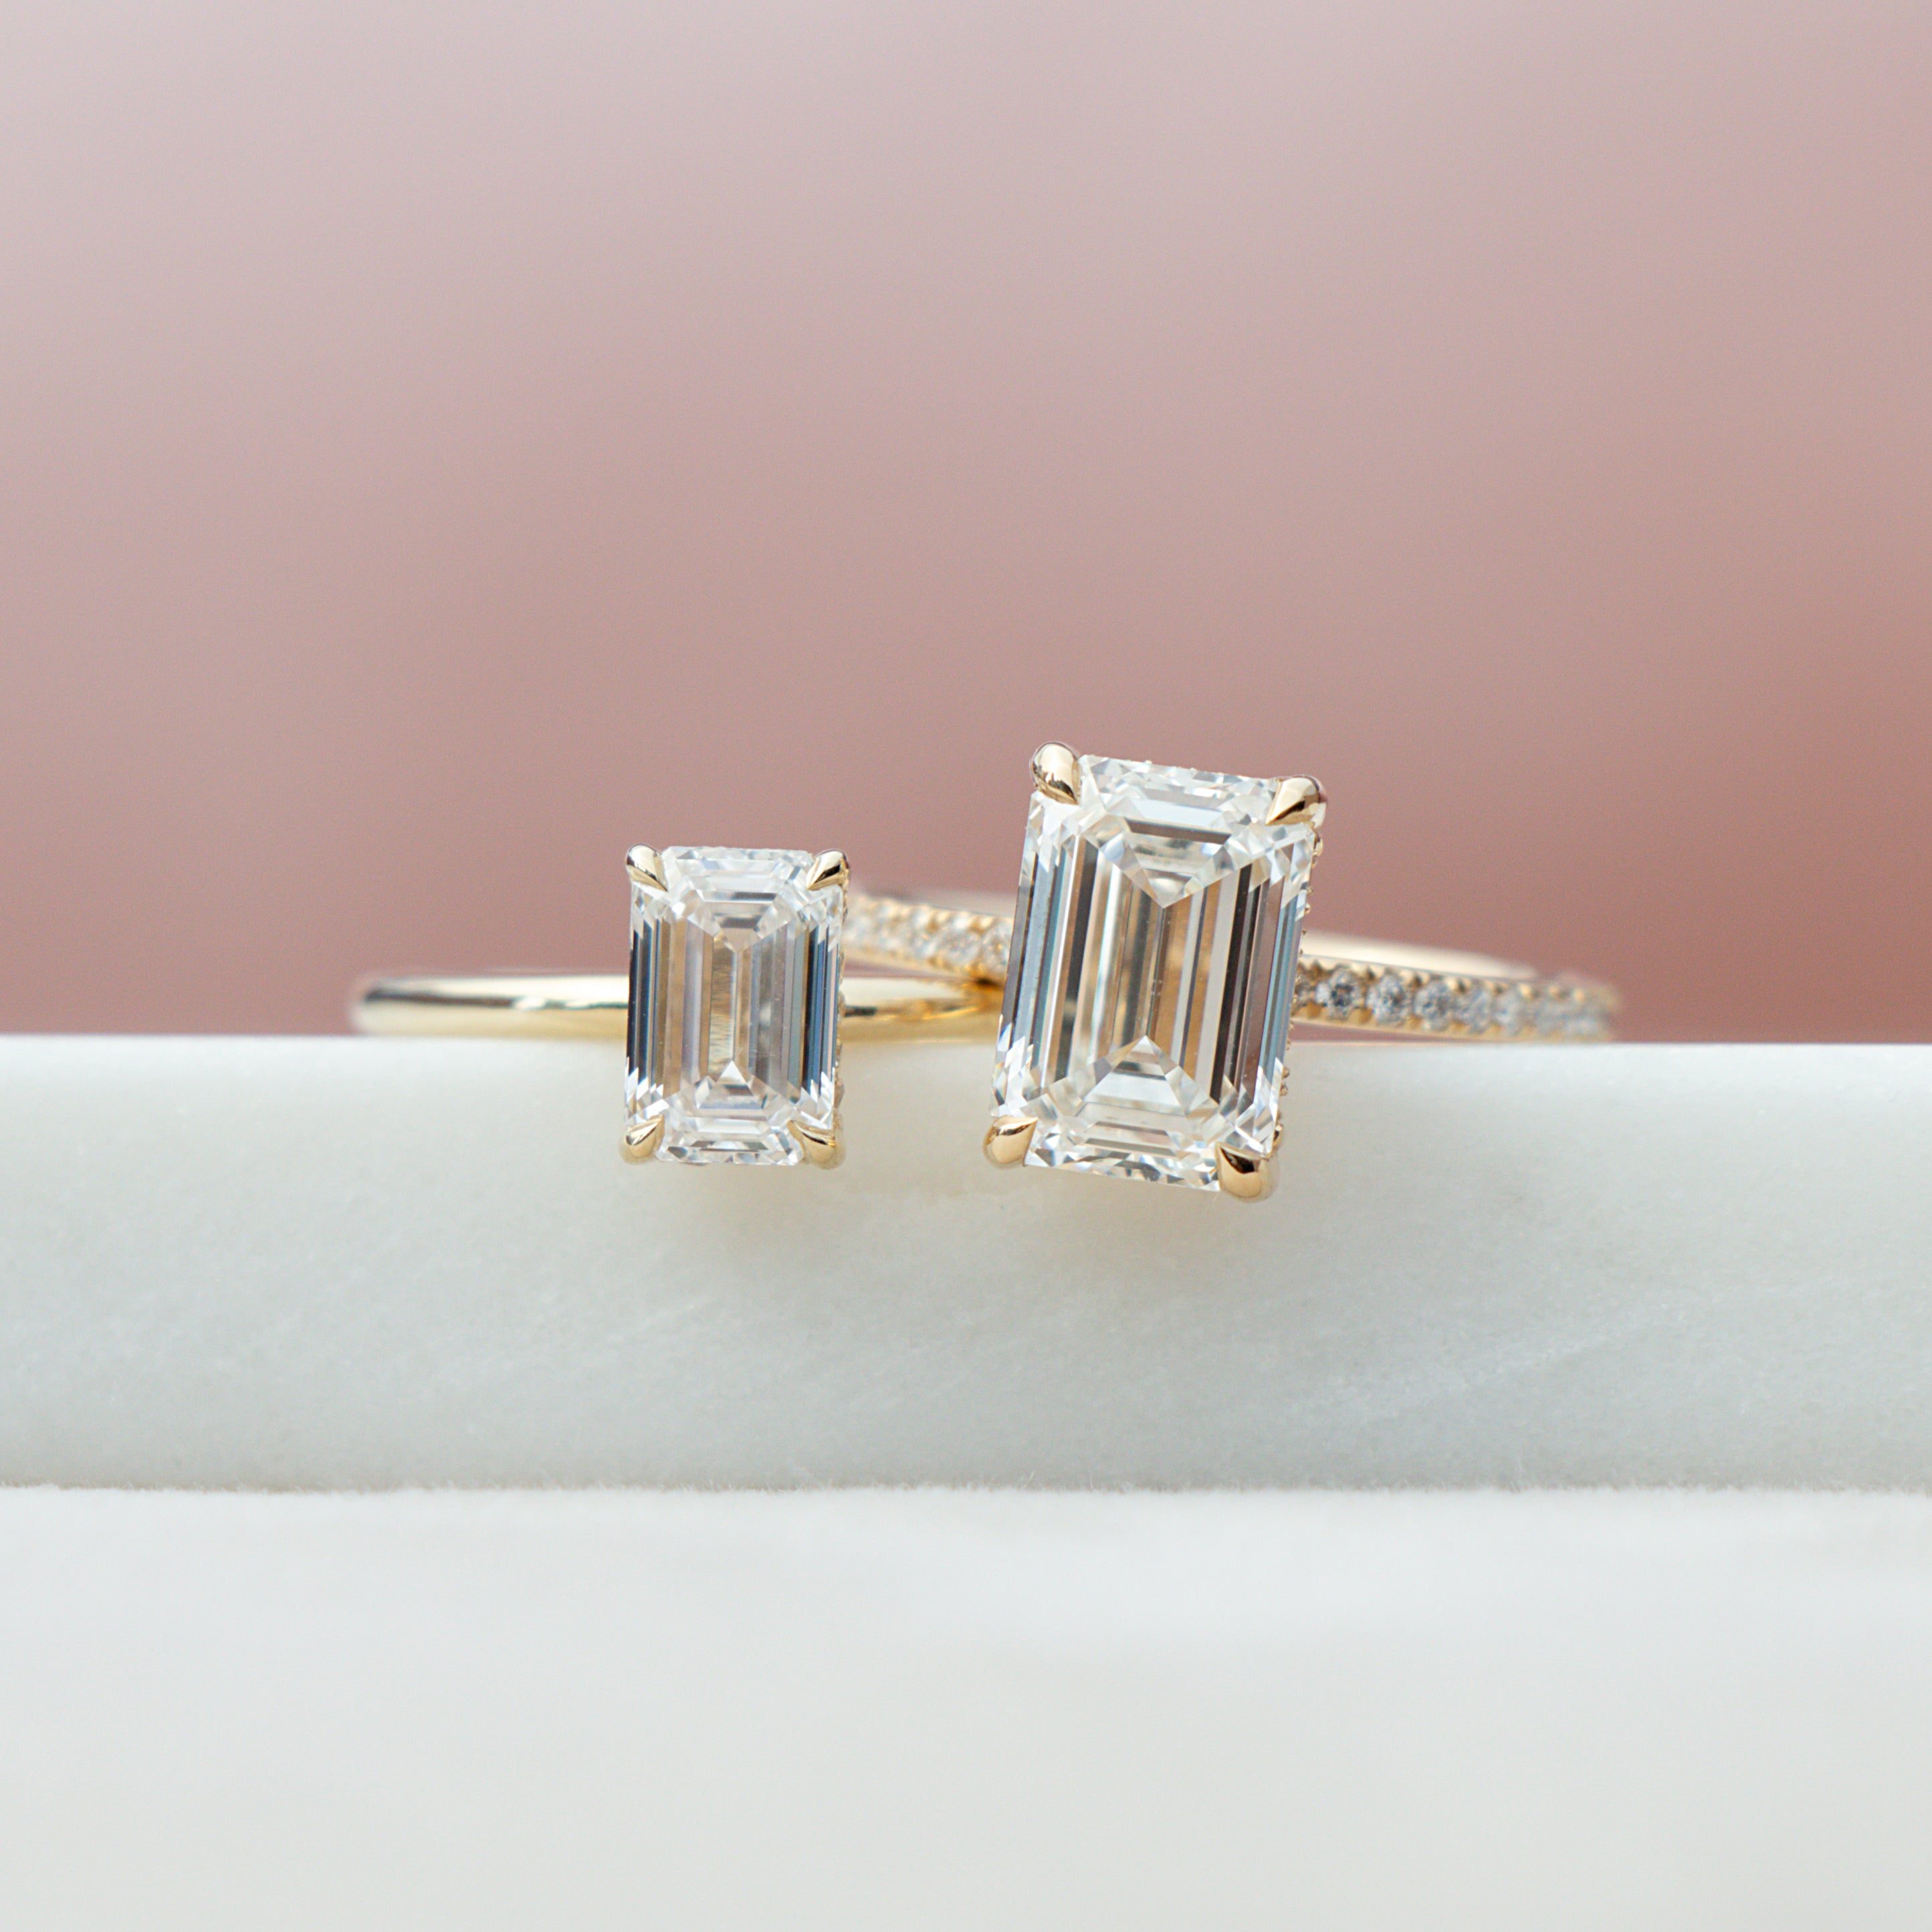 5 Reasons Why Emerald Cut Diamonds Are the Wrong Choice